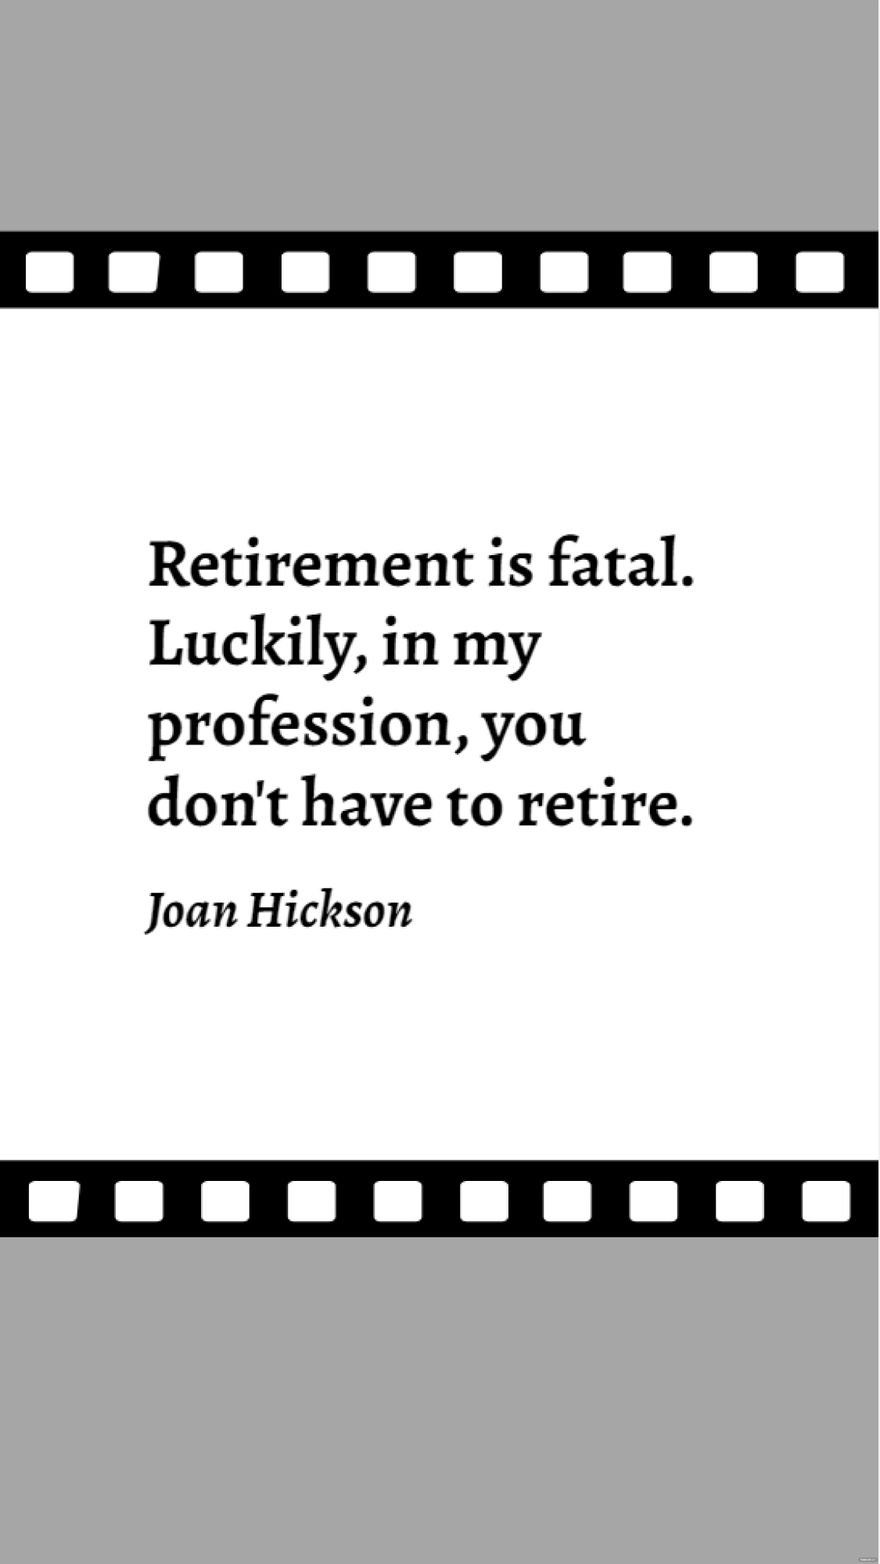 Free Joan Hickson - Retirement is fatal. Luckily, in my profession, you don't have to retire. in JPG